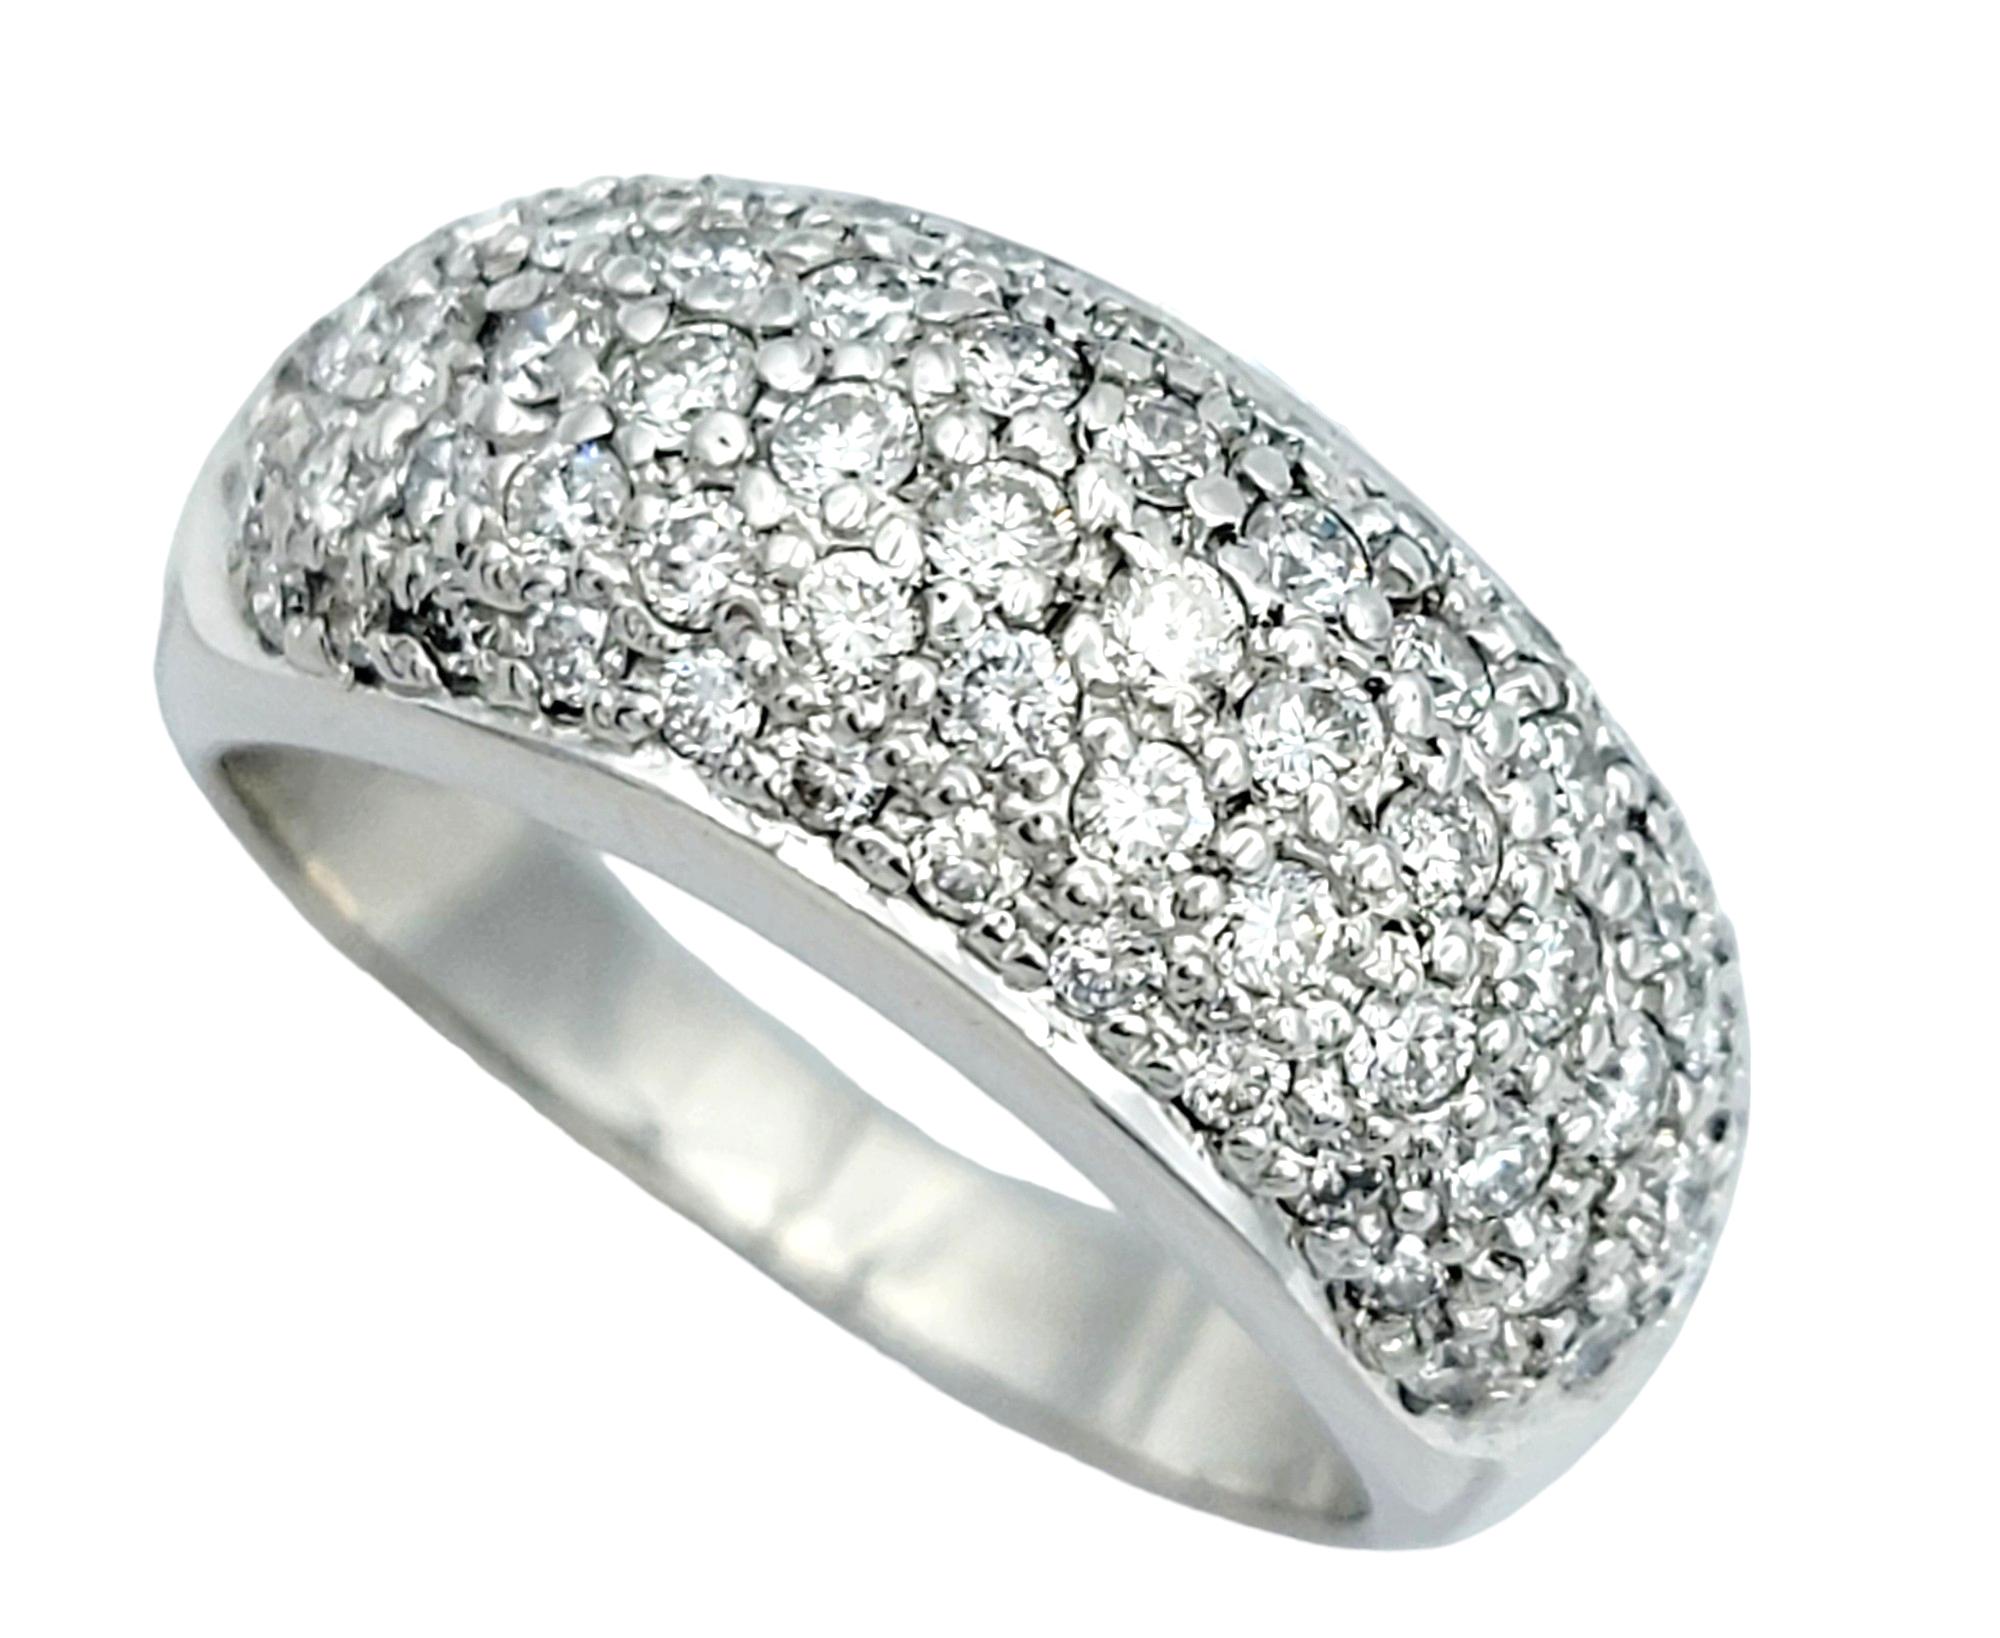 Ring Size: 6.5

This gorgeous ring, set in elegant 14 karat white gold, boasts a chic and timeless design. The dome shape adds a sense of volume and prominence to the piece, creating a stylish and eye-catching silhouette. The entire top surface of